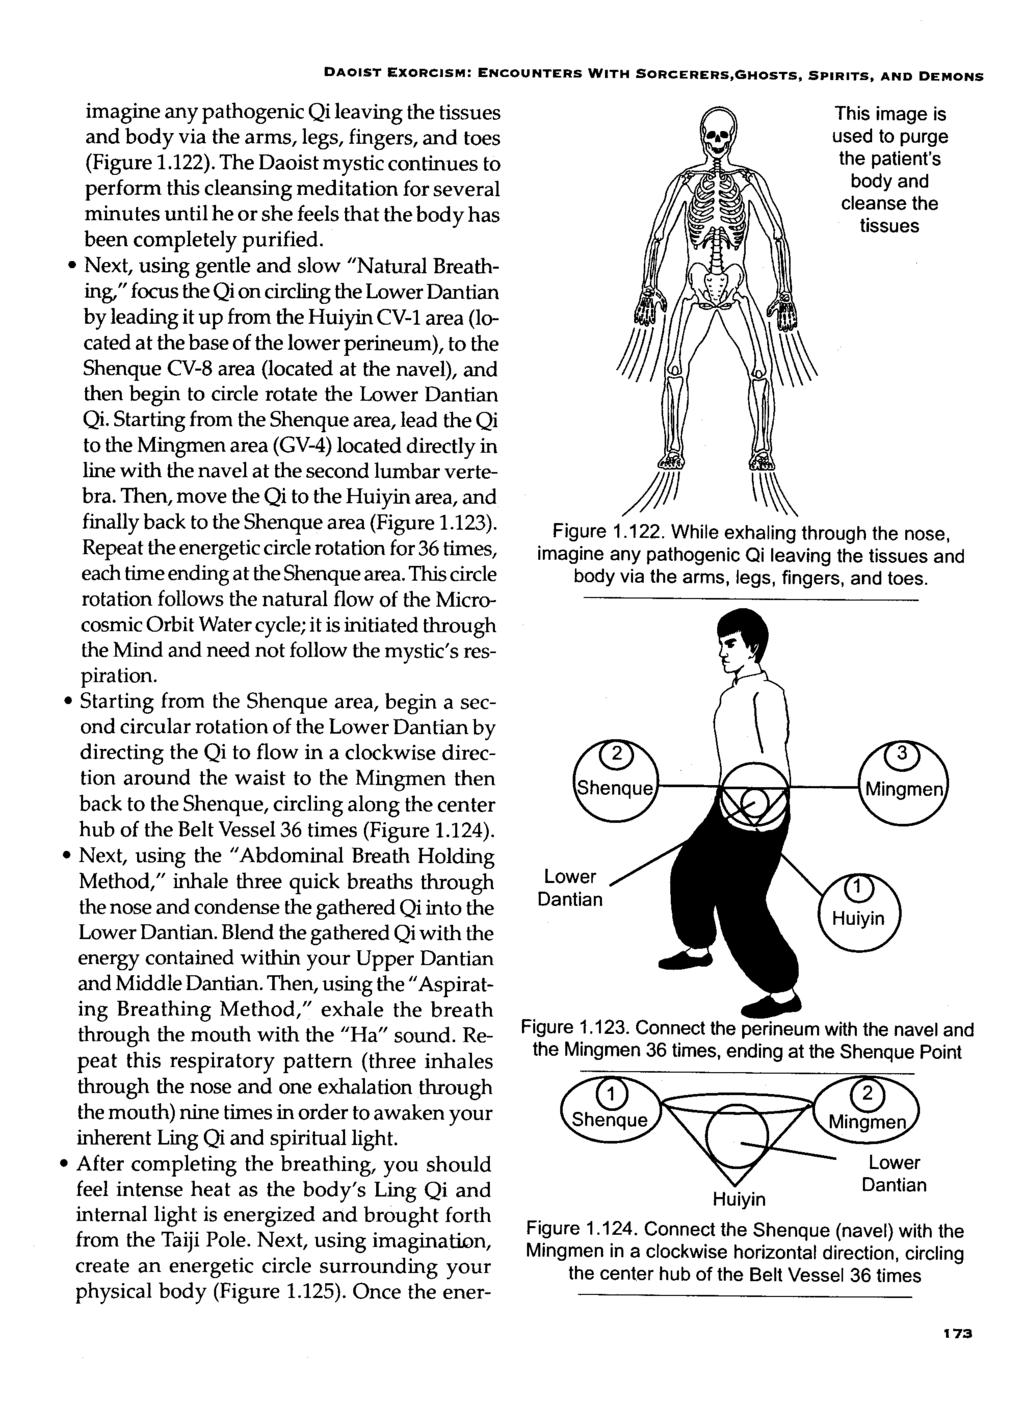 DAOIST EXORCISM: ENCOUNTERS WITH SORCERERS,GHOSTS, SPIRITS, AND DEMONS imagine any pathogenic Qi leaving the tissues and body via the arms, legs, fingers, and toes (Figure 1.122).